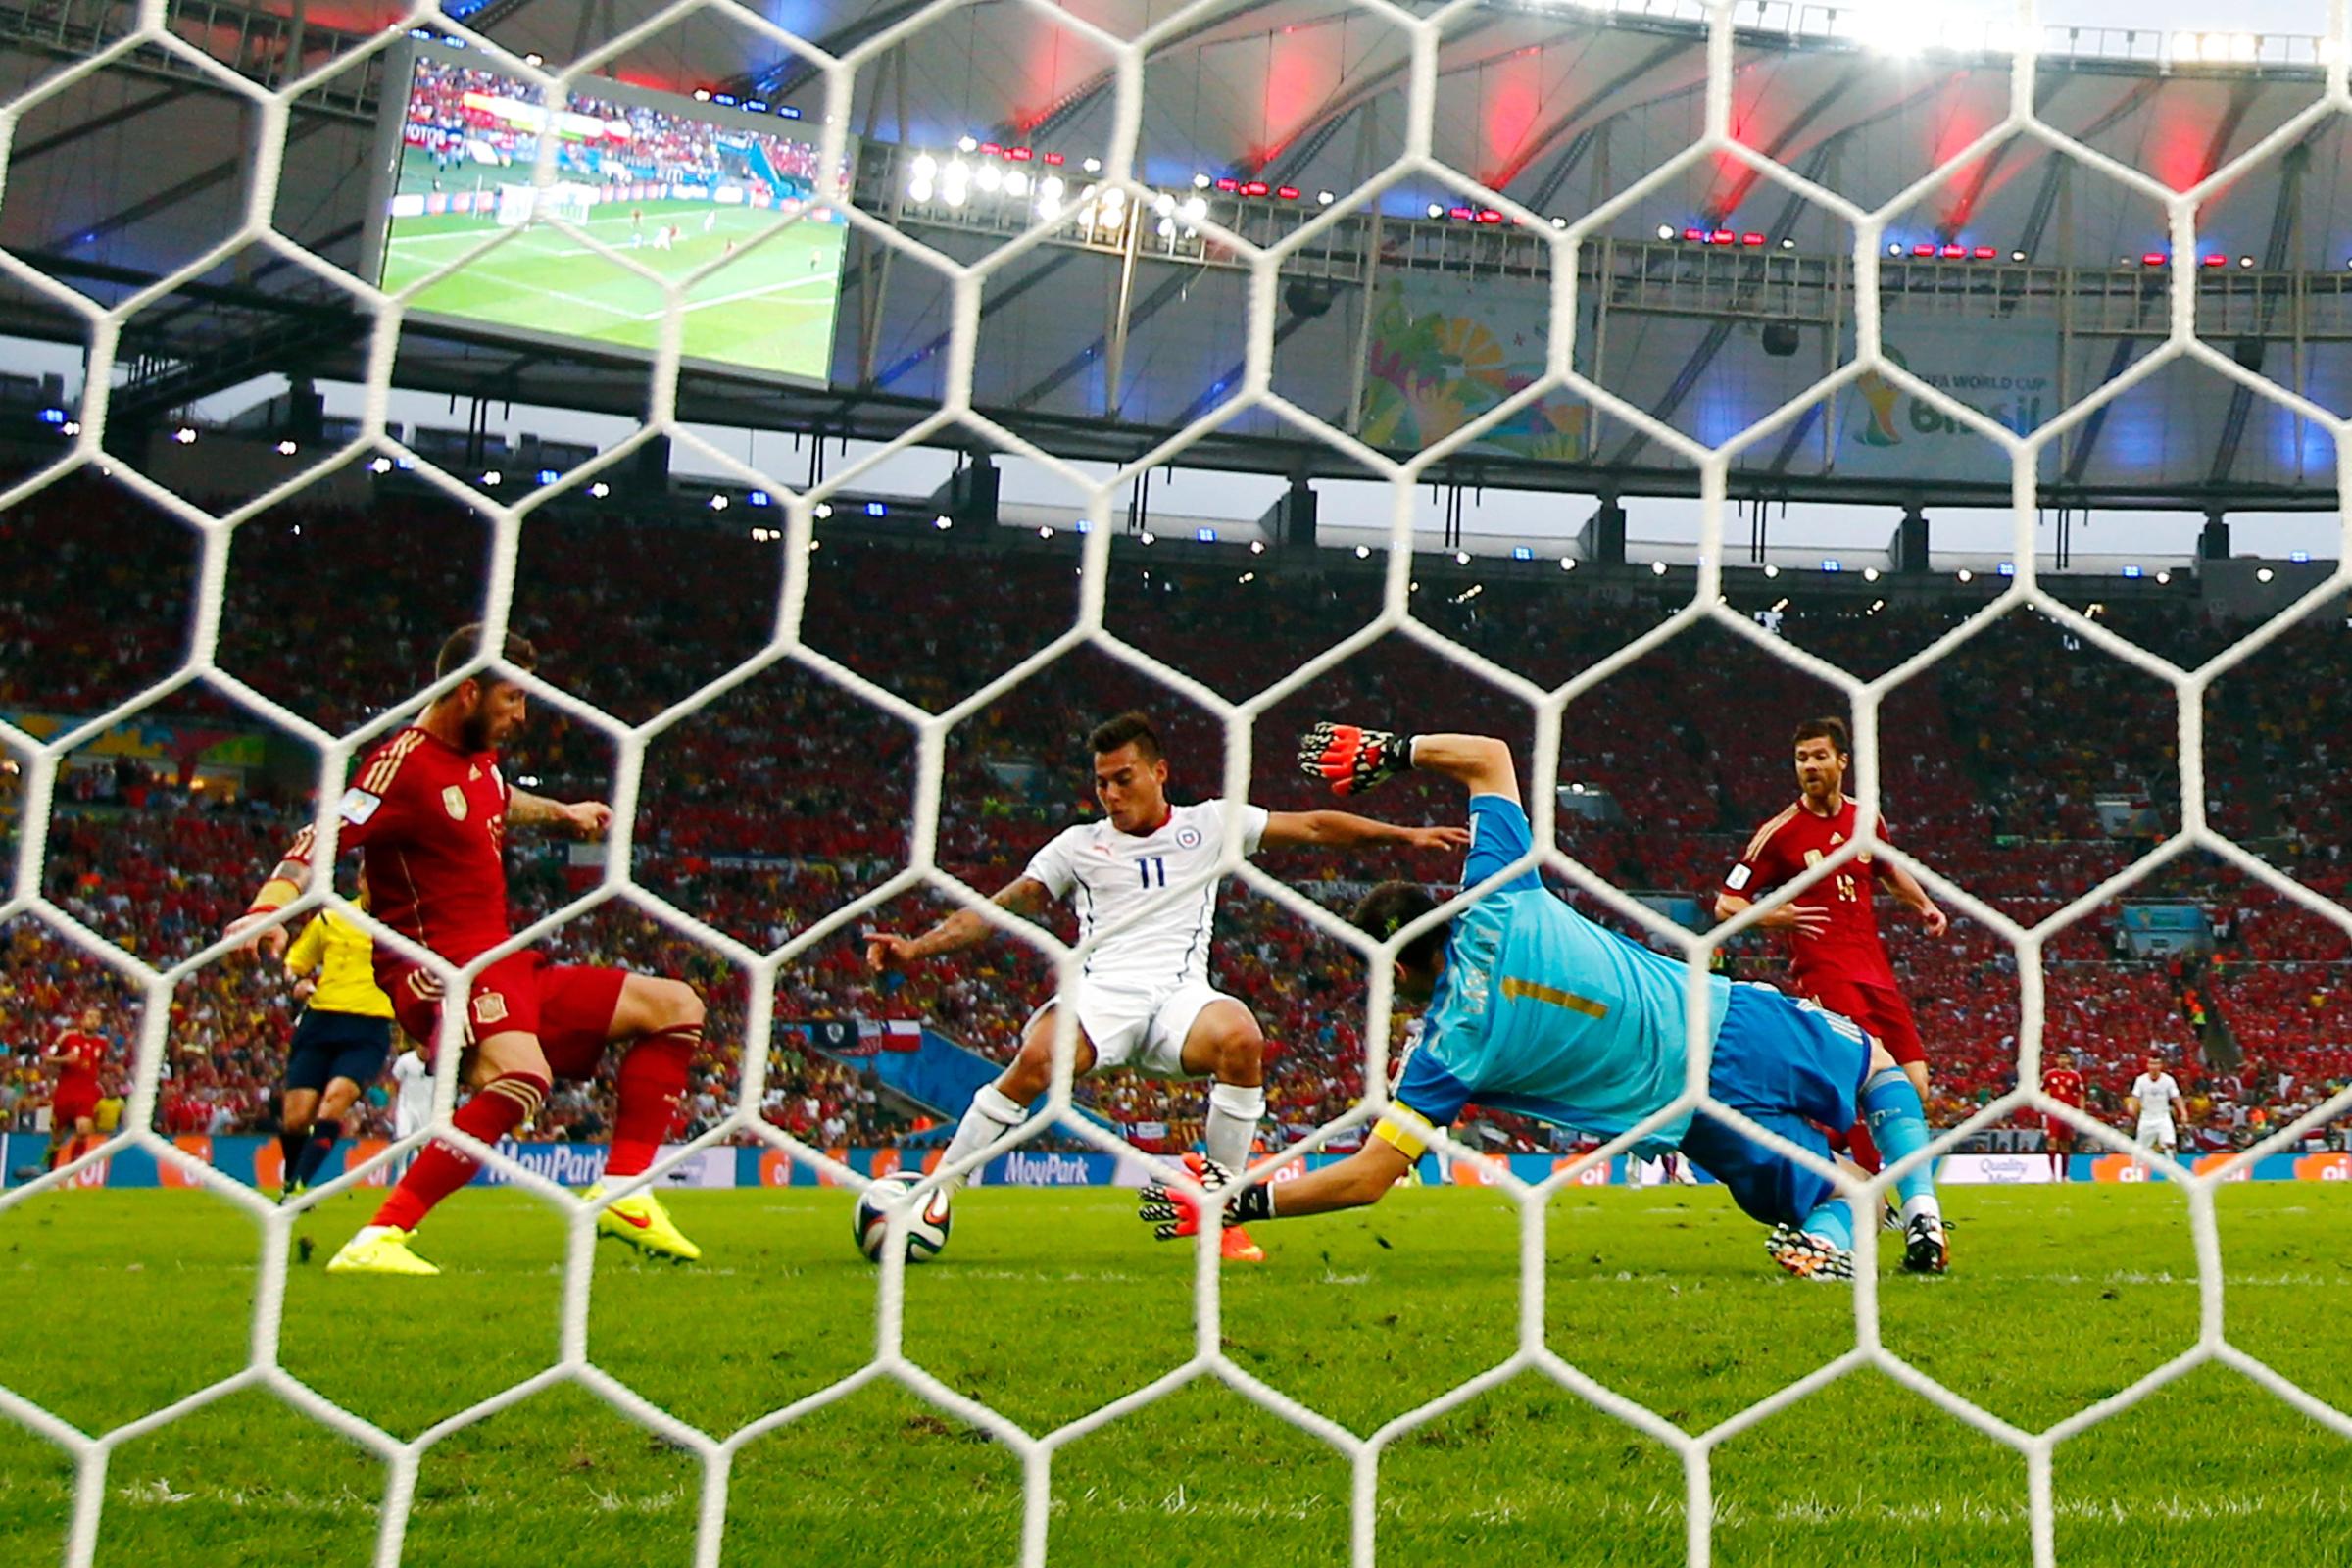 Eduardo Vargas of Chile shoots and scores his team's first goal past Sergio Ramos and goalkeeper Iker Casillas of Spain during the 2014 FIFA World Cup Brazil Group B match between Spain and Chile at Maracana on June 18, 2014 in Rio de Janeiro.